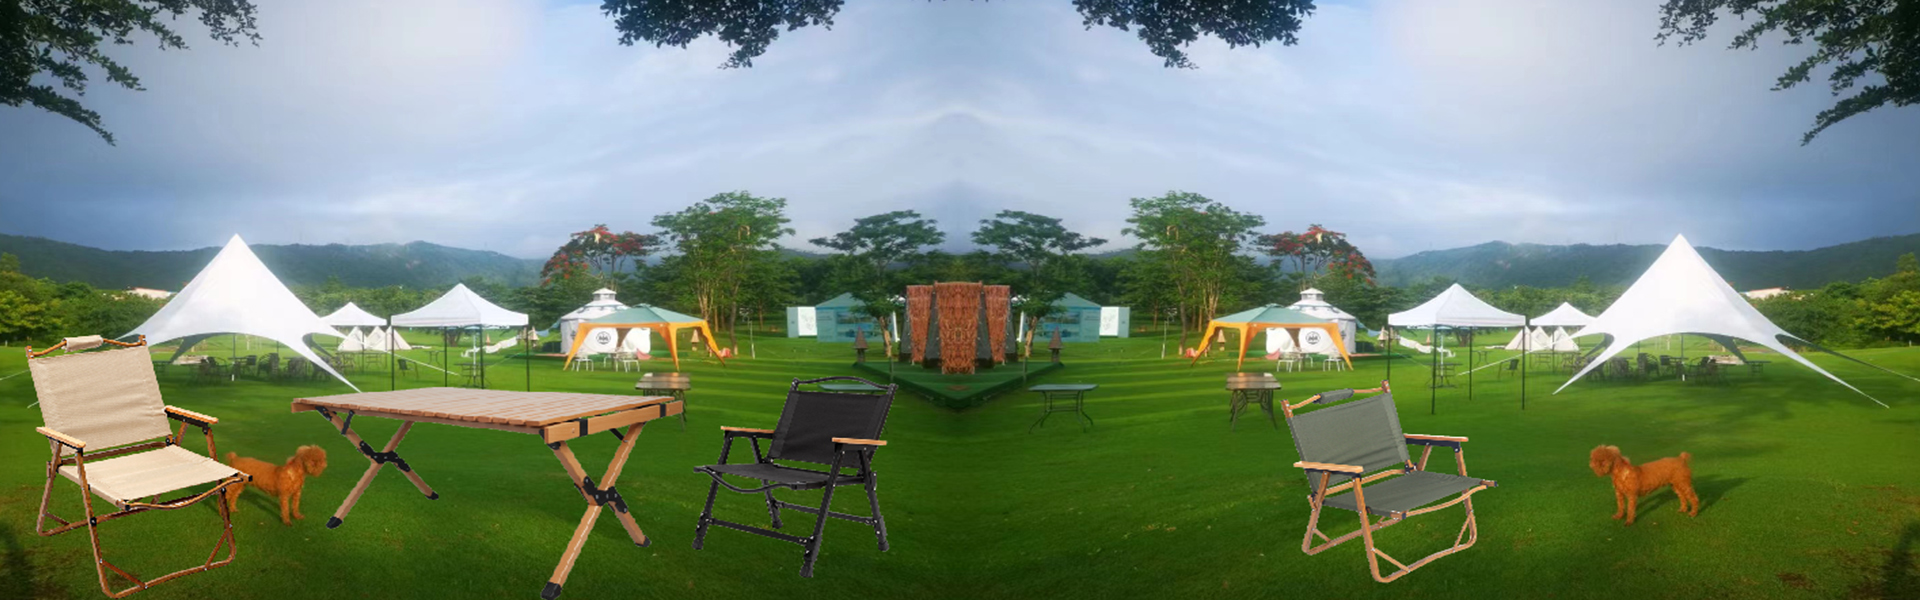 Camping Chair and Table